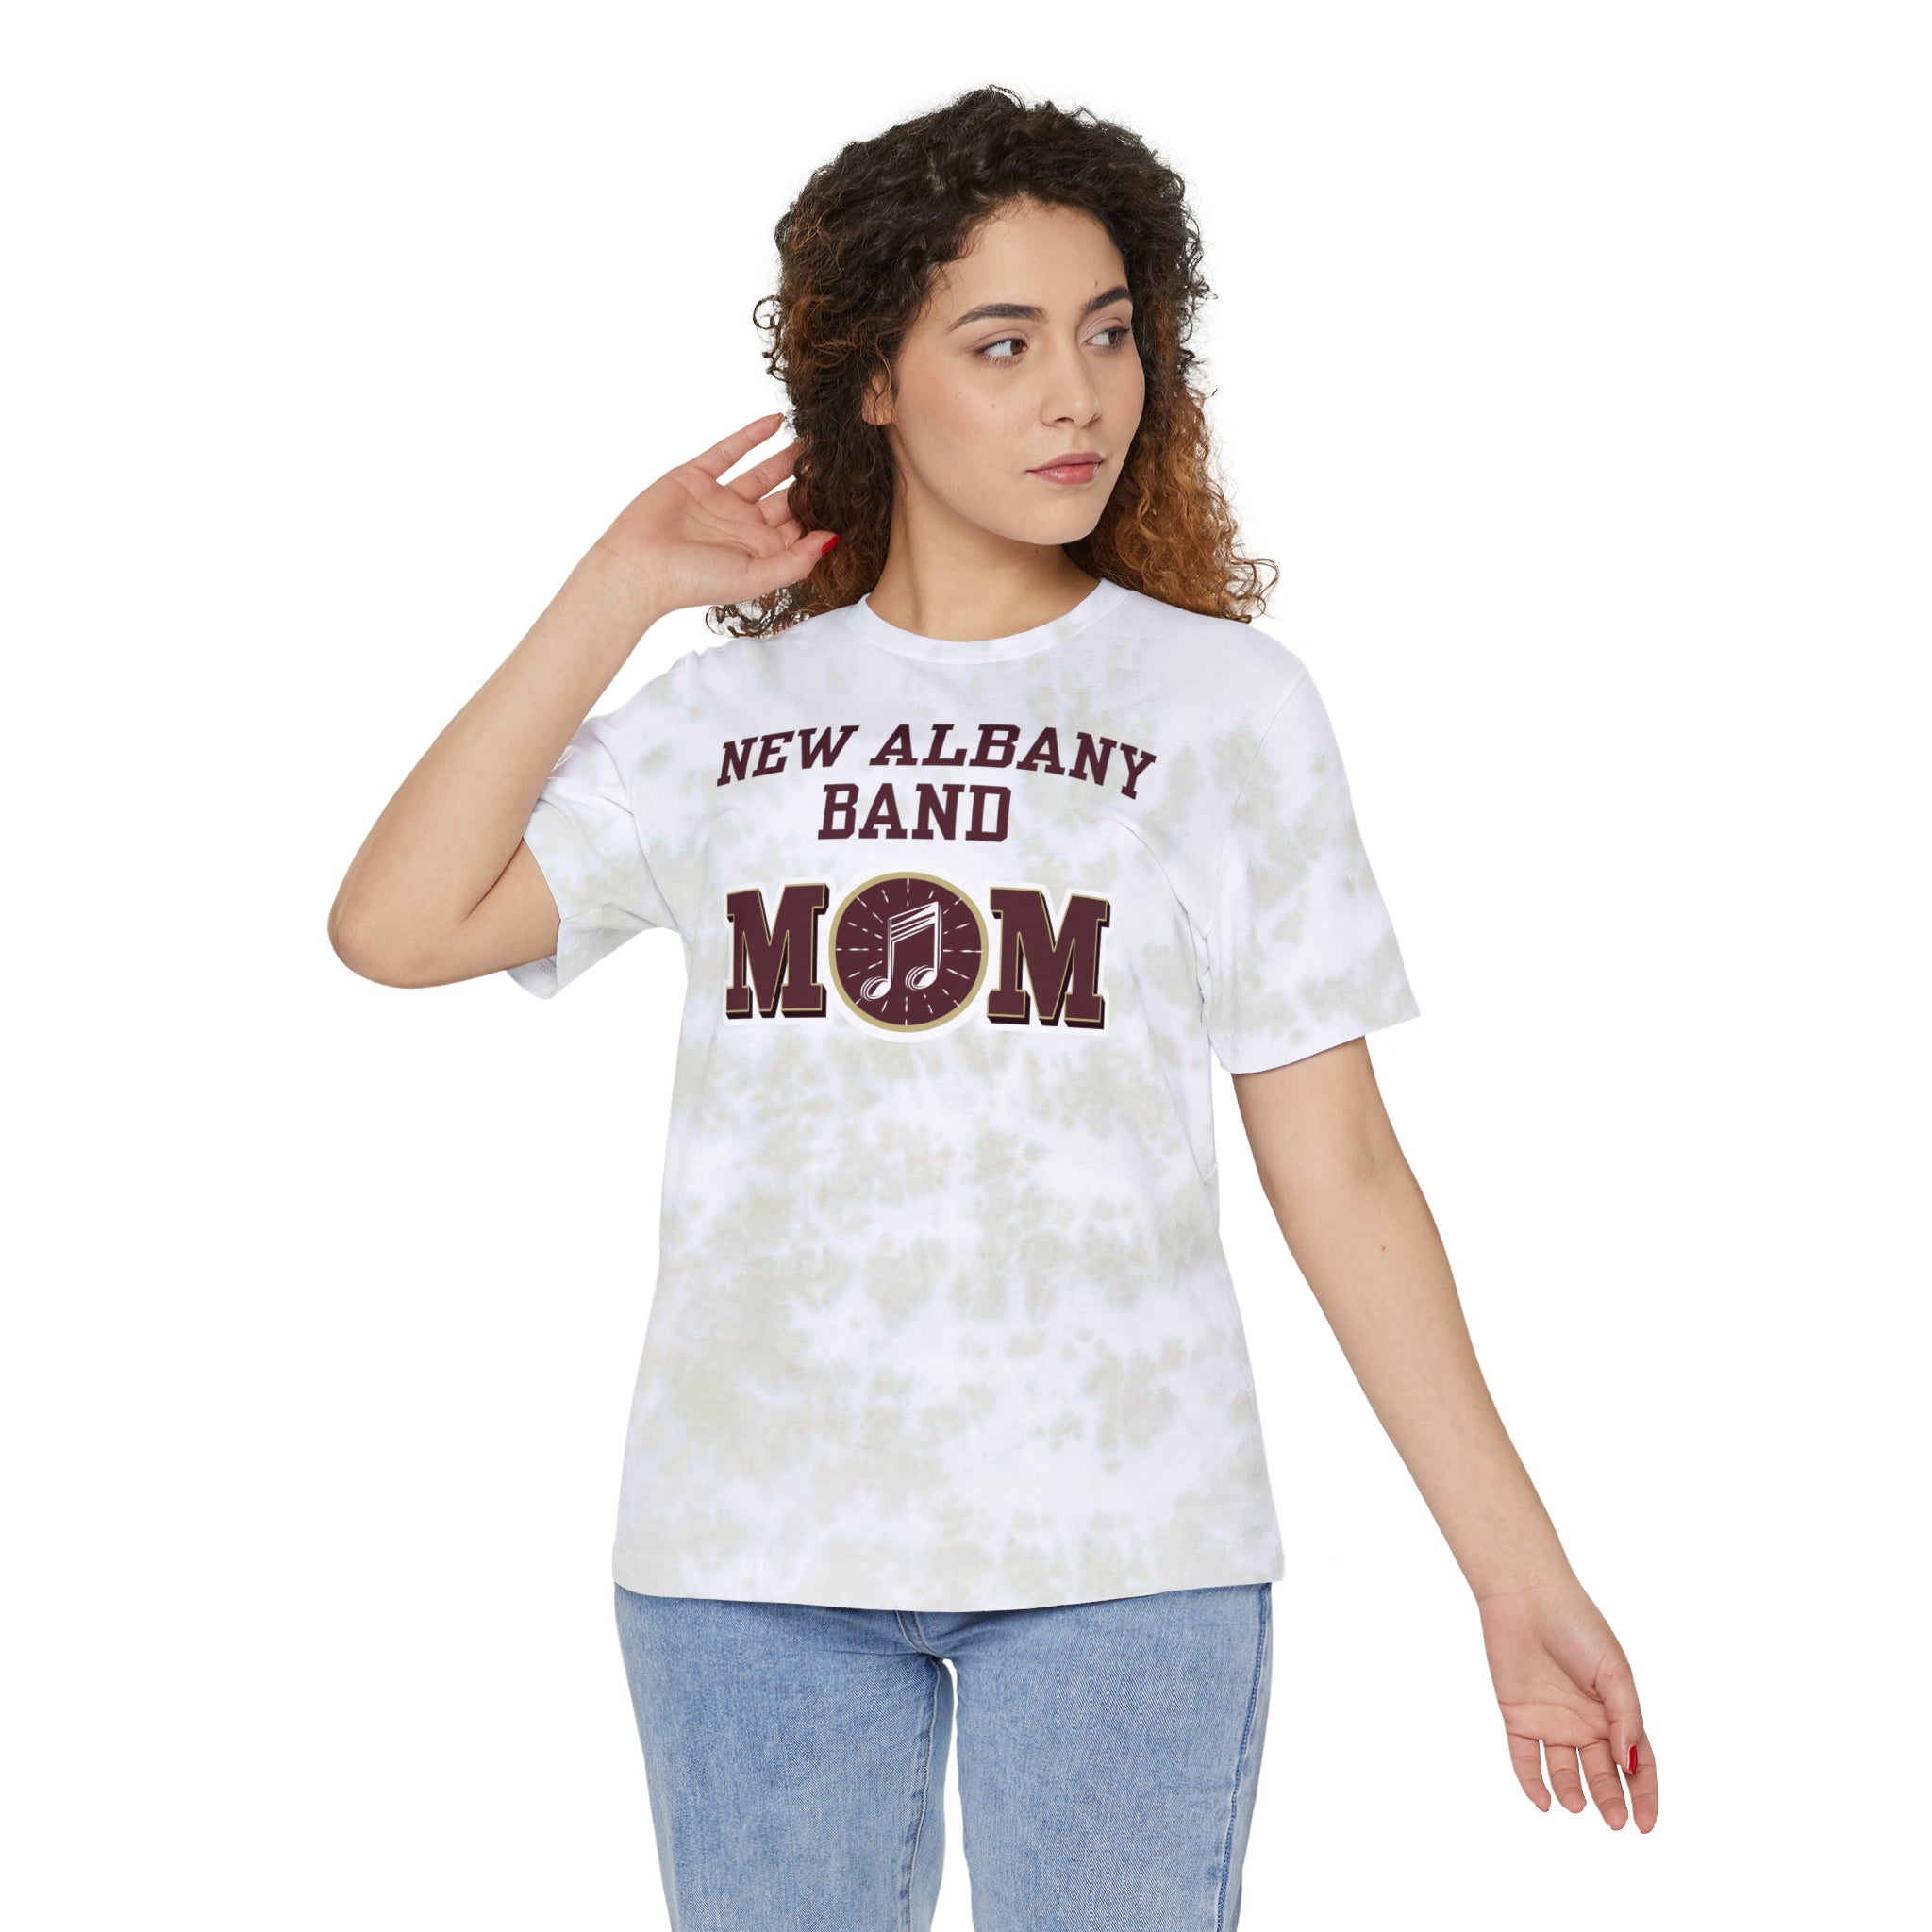 Women's Band Mom Tie-Dye Short Sleeve Graphic Tee - New Albany Eagles